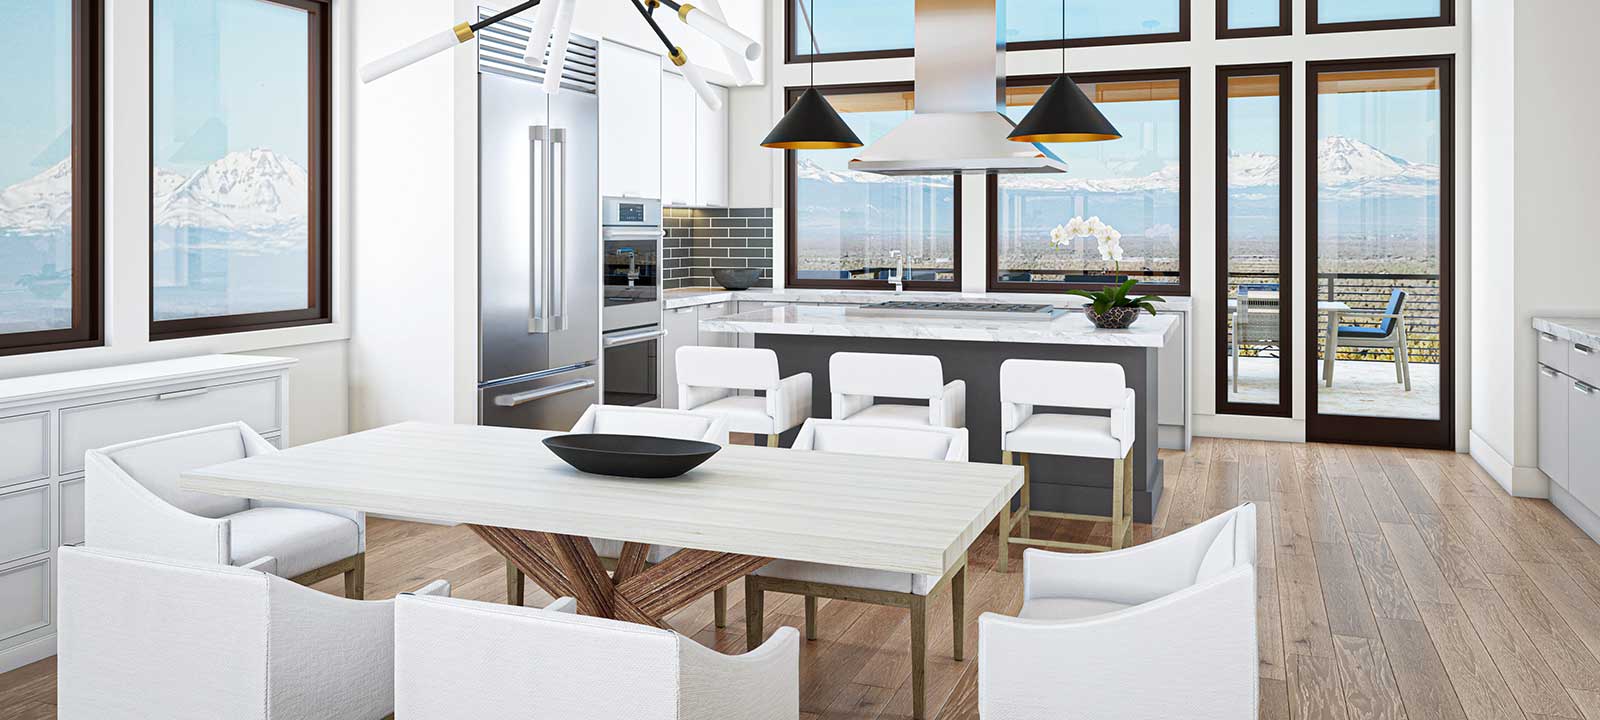 Aspen Kitchen - Shown with standard options